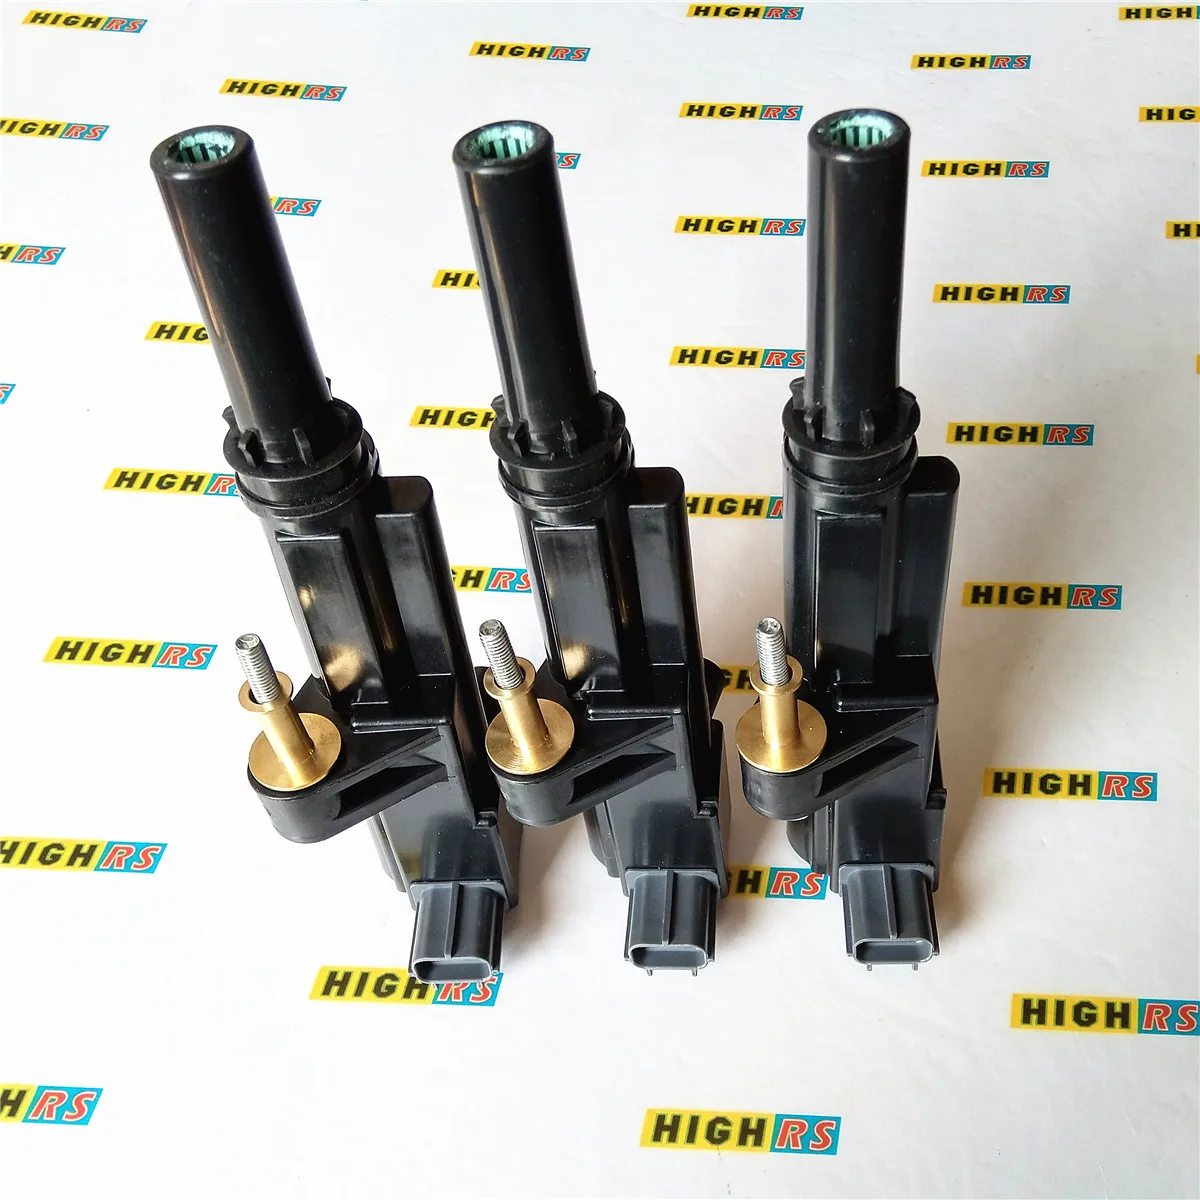 

Ignition Coils Coil Pack fit for Grand Cherokee Dak Liberty Jeep Ram Dakota Jeep V6 3.7L 5149199AA IC743 5C1709 UF640 52-2064